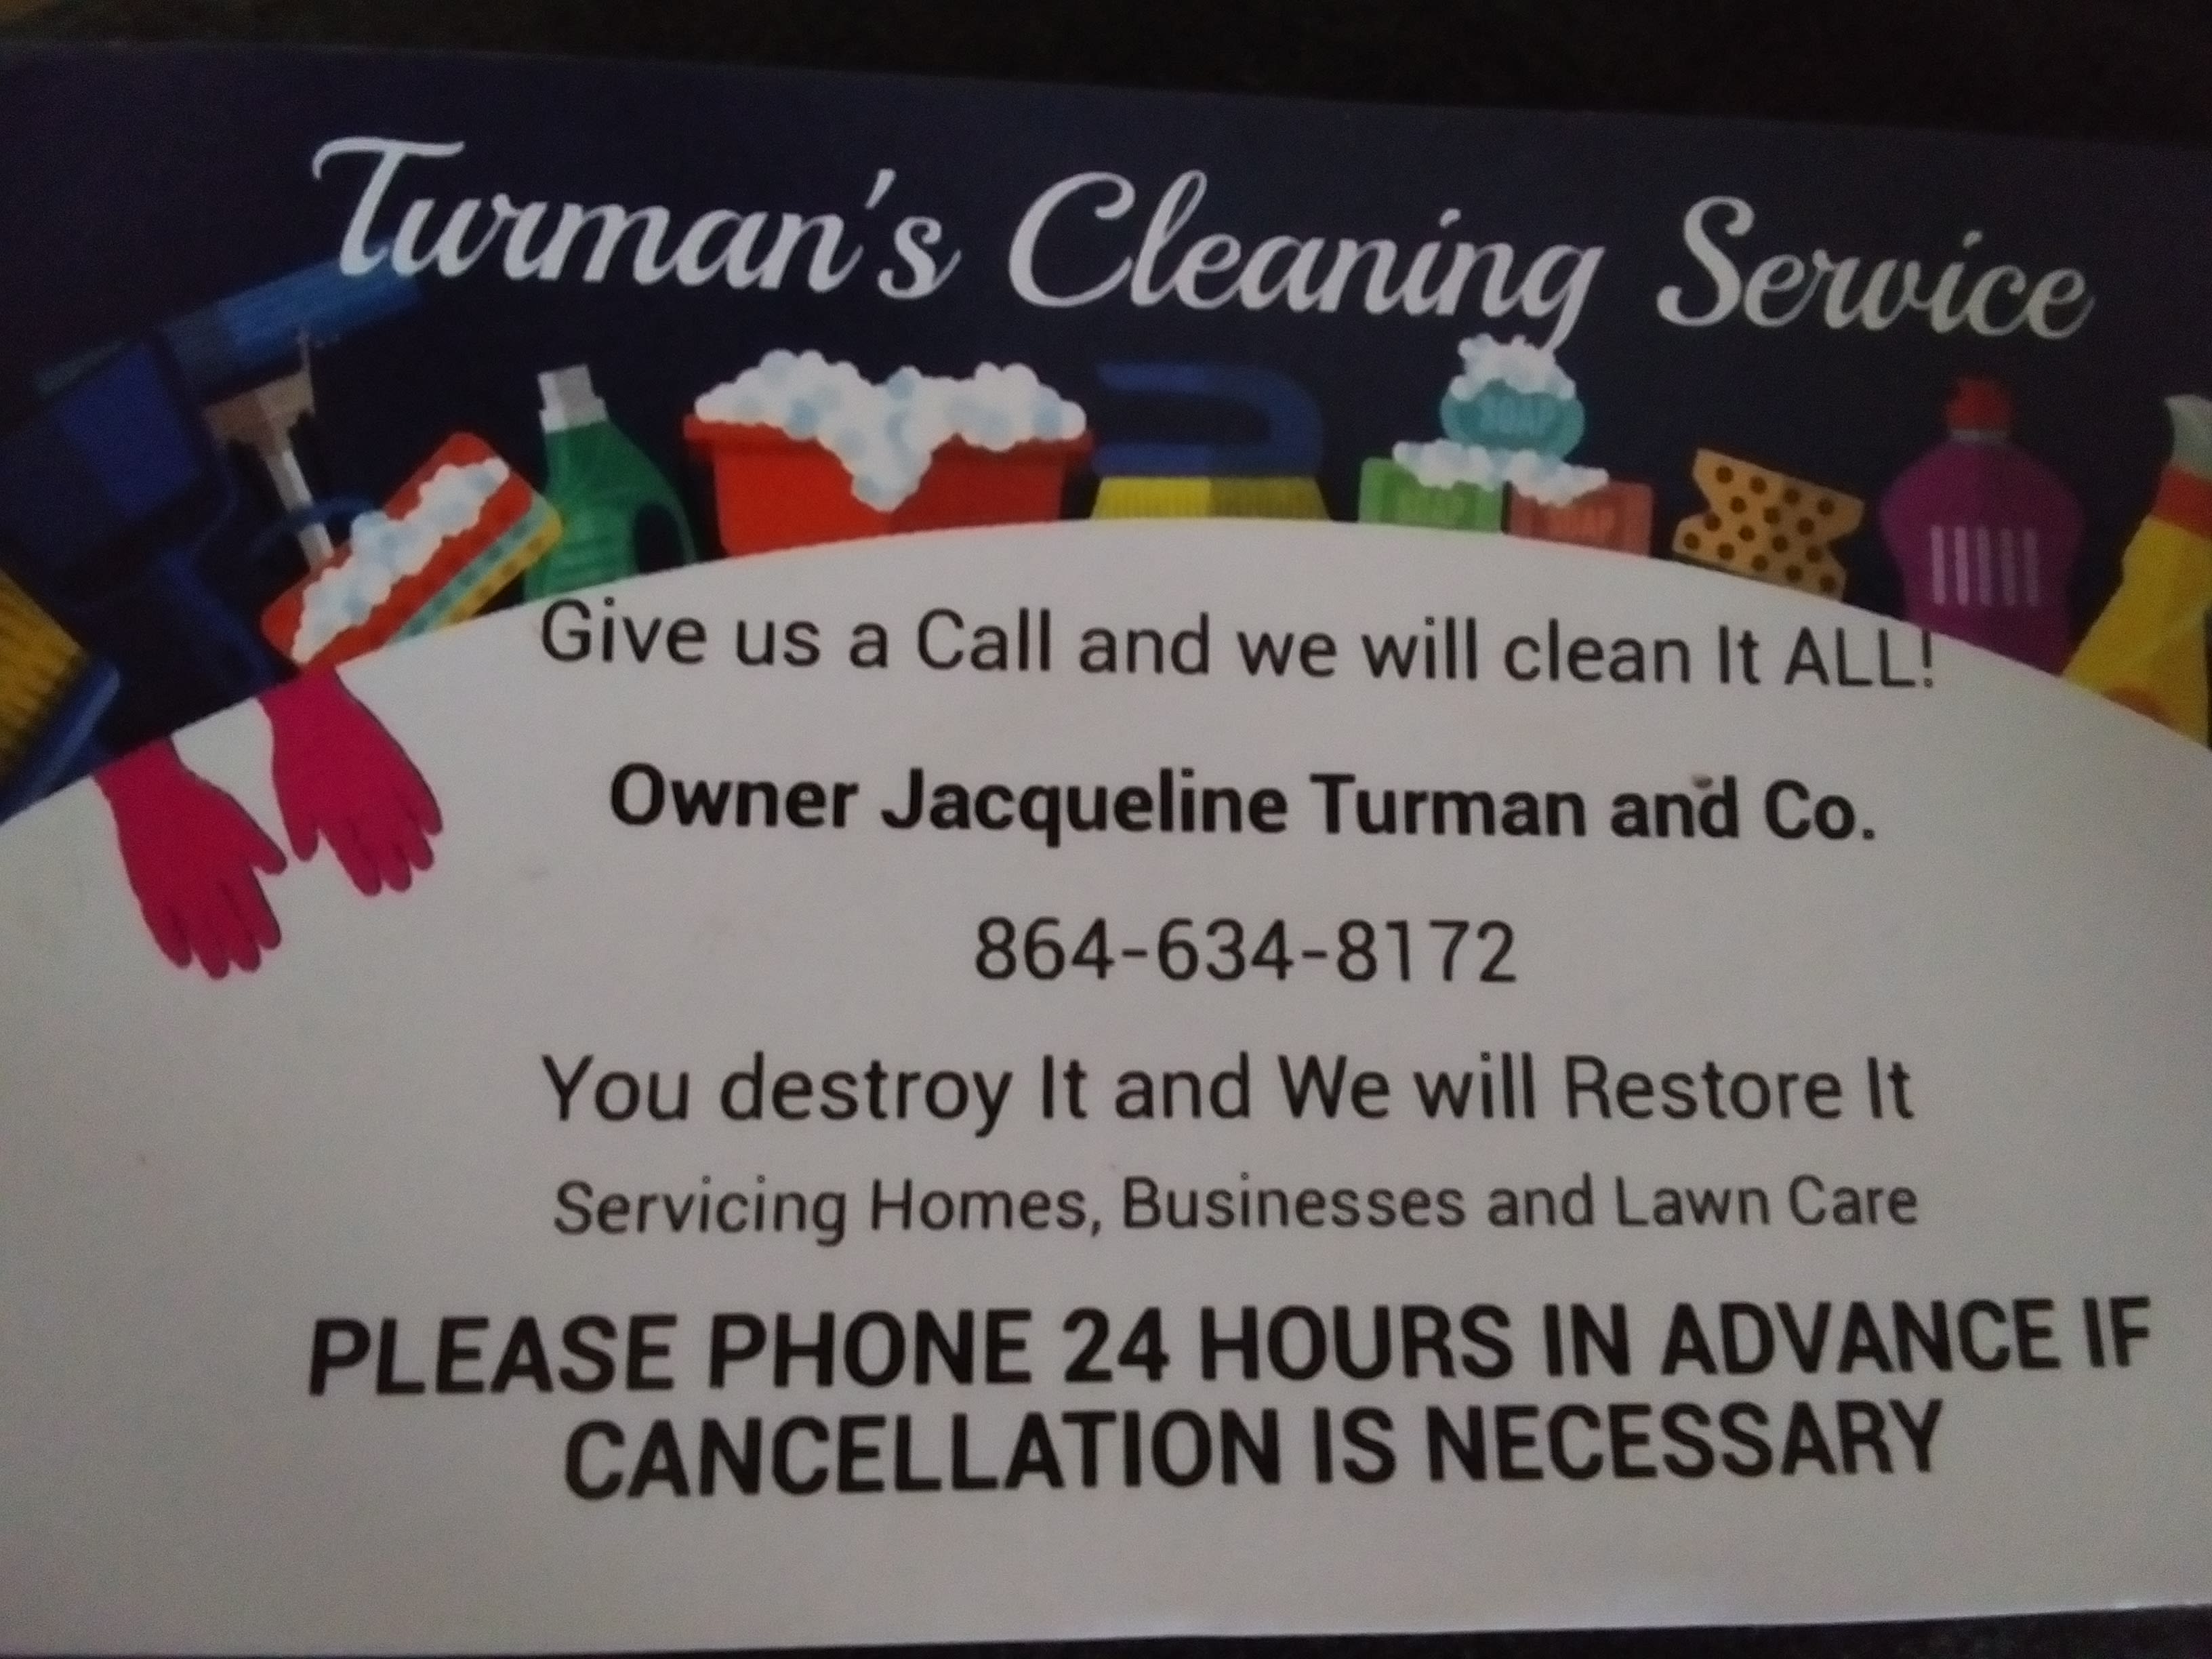 Turman's Cleaning Service